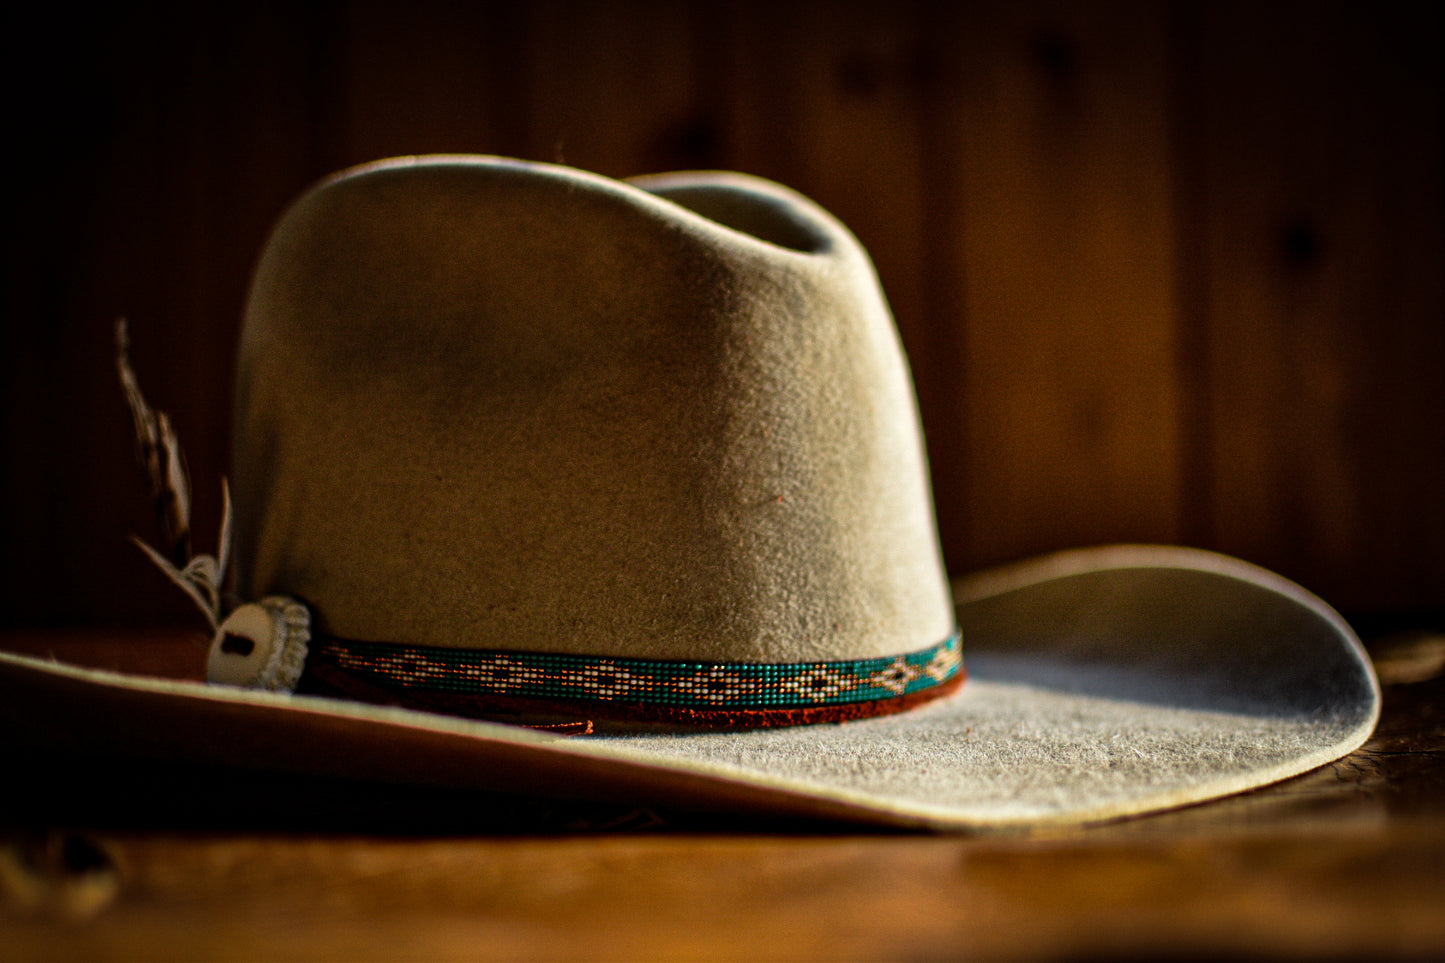 Hat Band — “Buck Creek” in turquoise